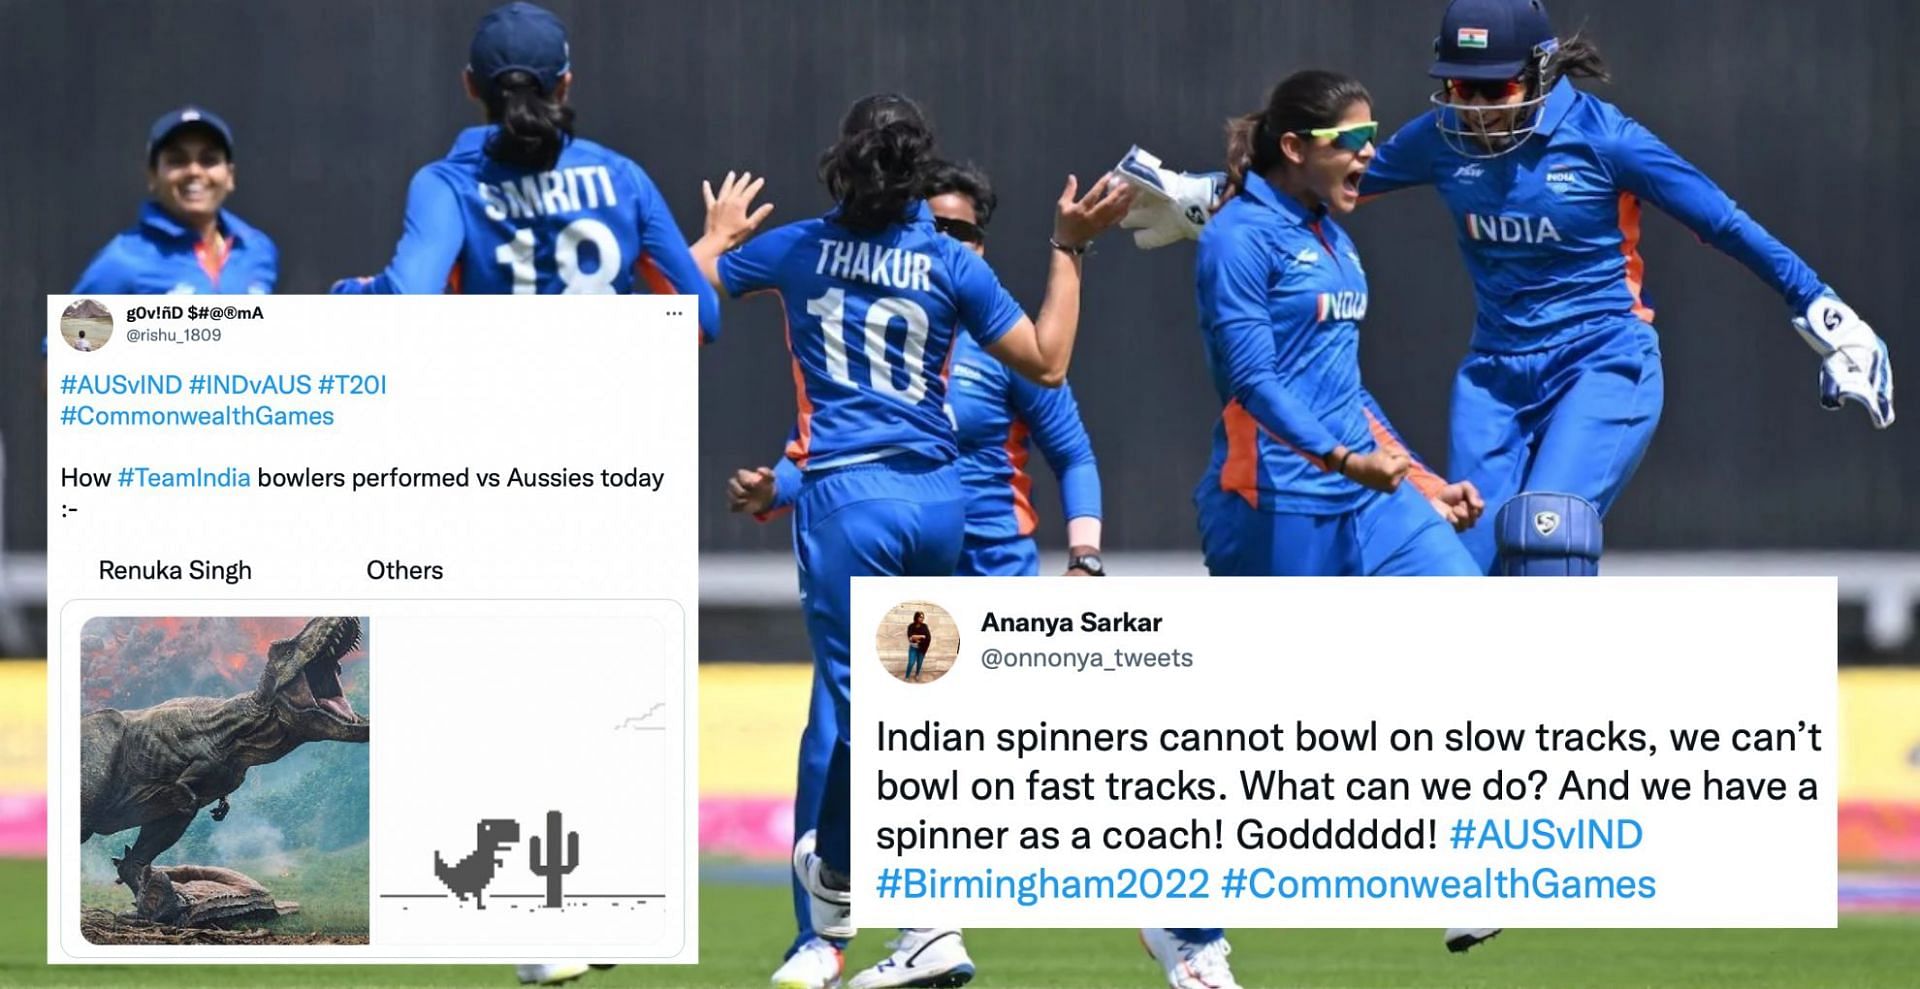 India began their Commonwealth Games campaign with a defeat. (Credit: Twitter)